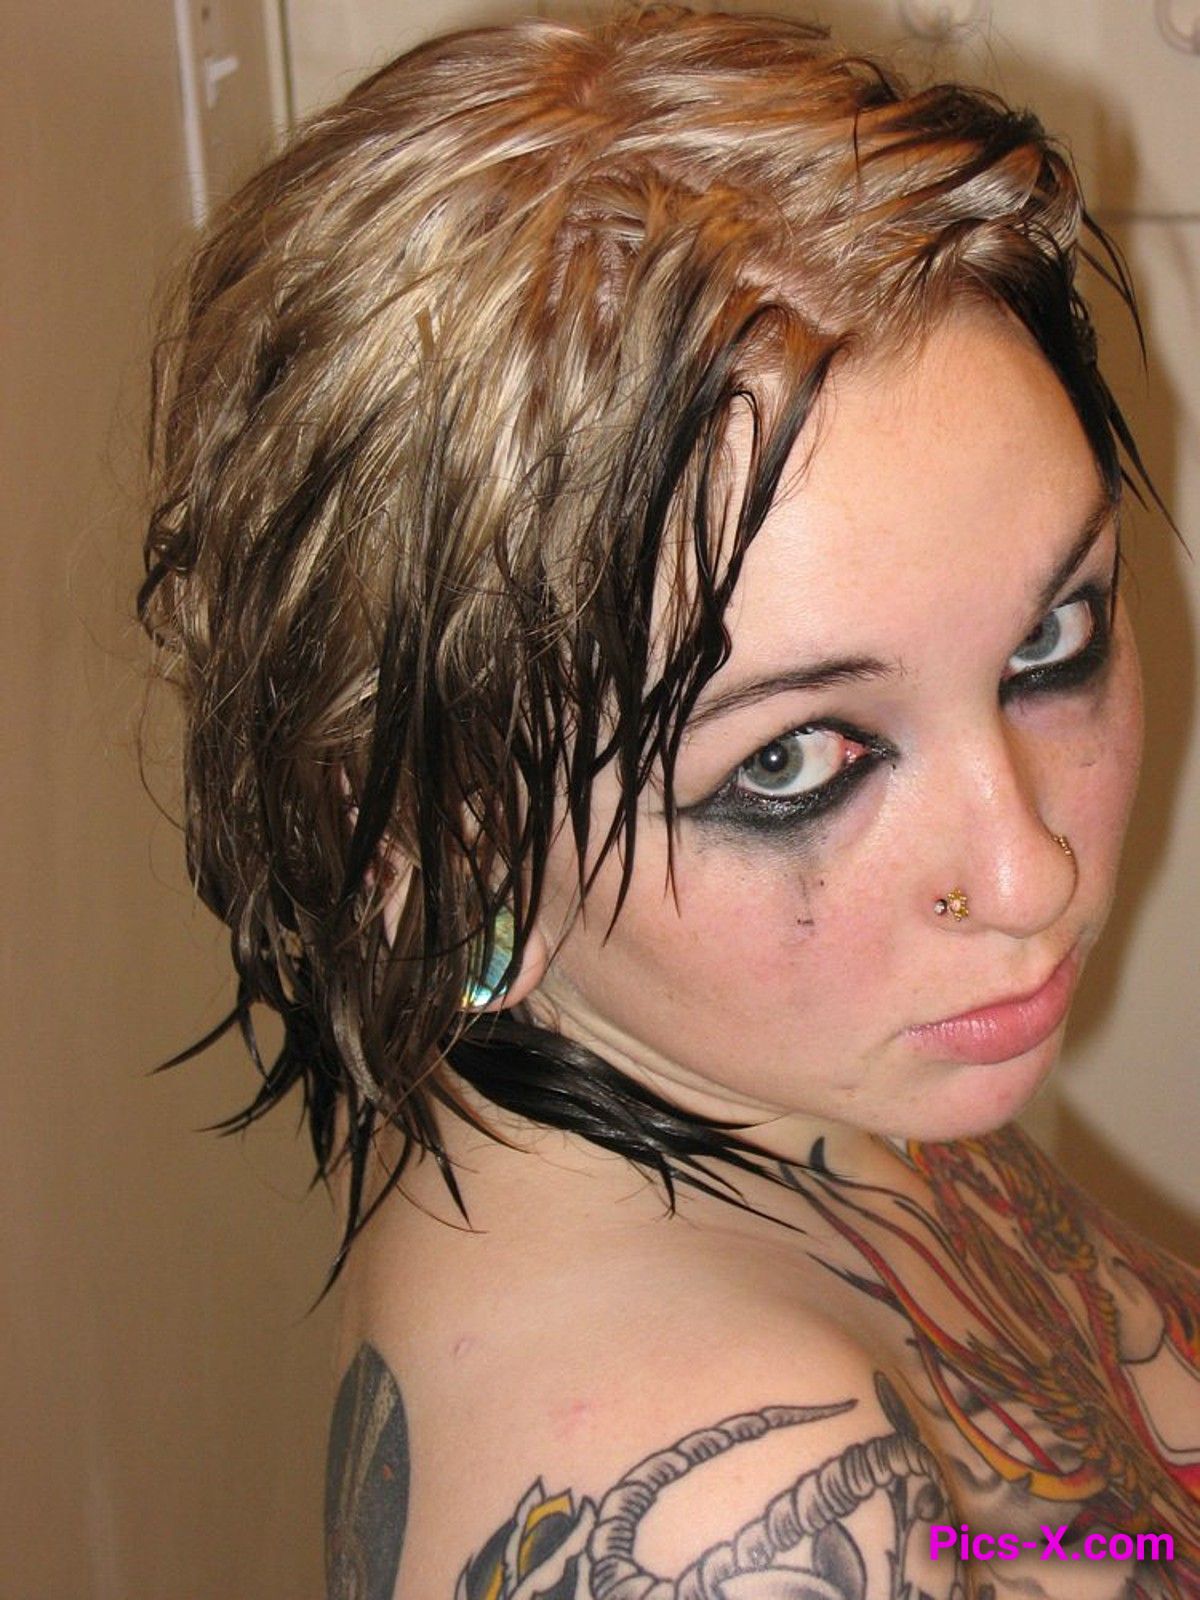 Tattooed girl with running makeup posing naked at home - Punk Rock Girlfriend - Image 42